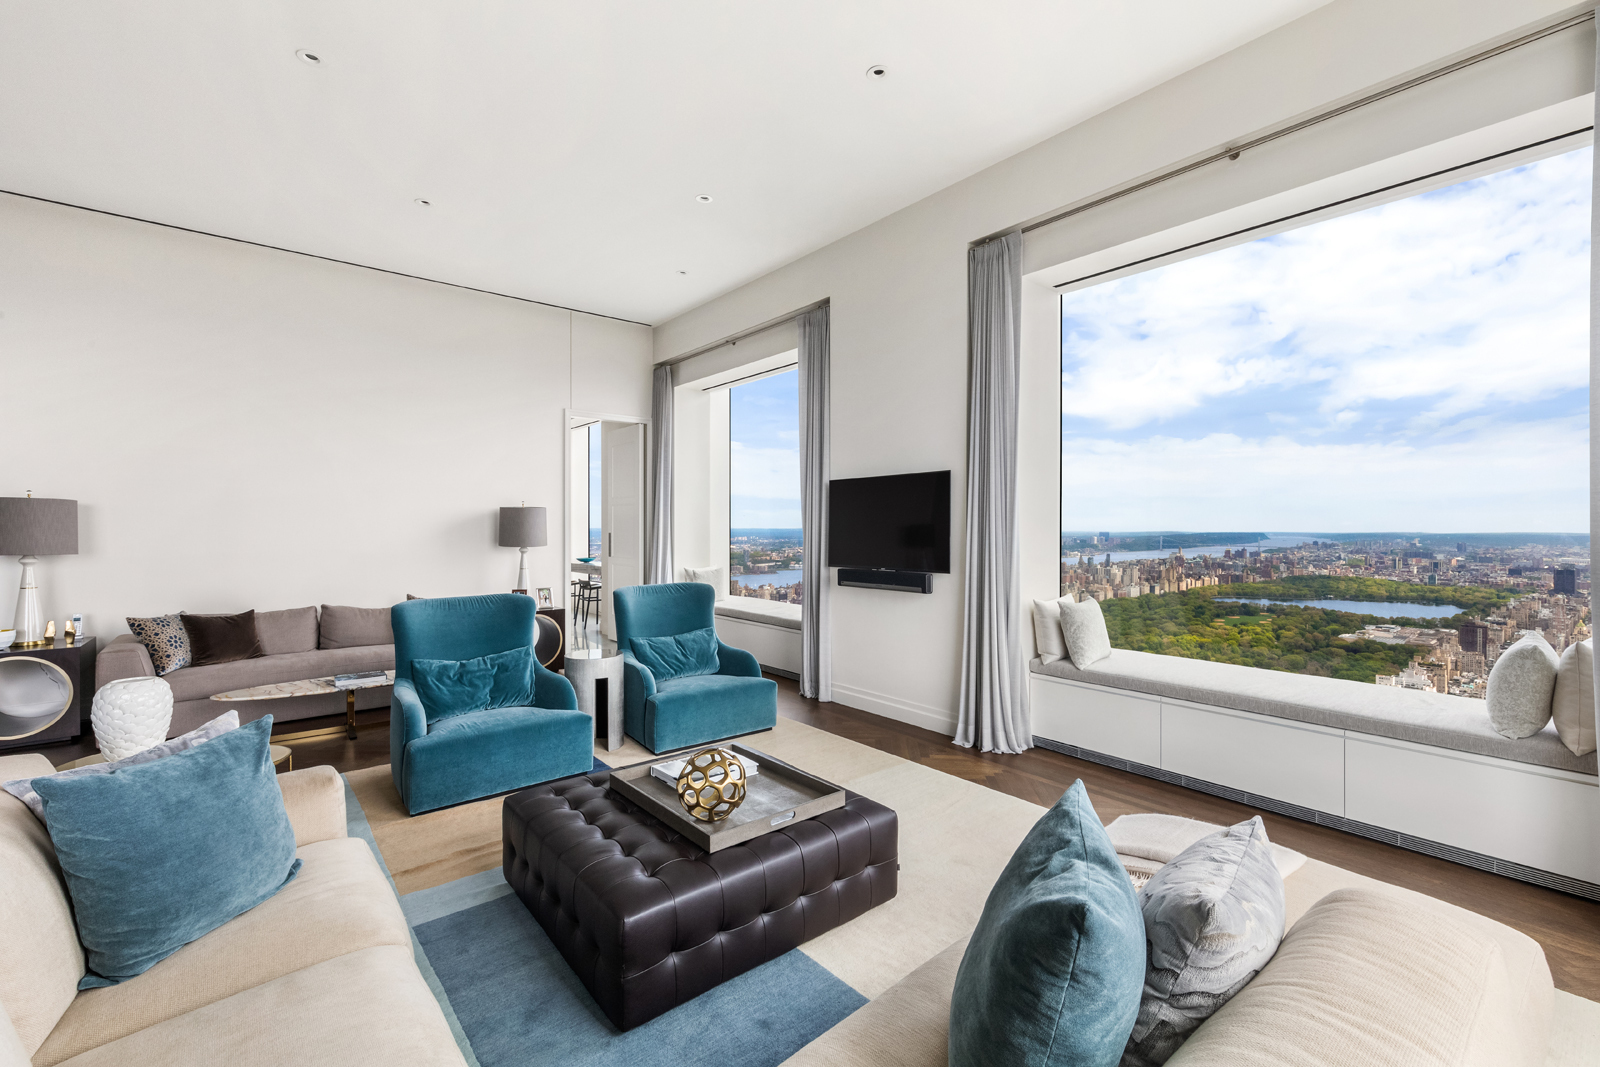 432 Park Avenue 70A, Midtown Central, Midtown East, NYC - 3 Bedrooms  
4.5 Bathrooms  
10 Rooms - 